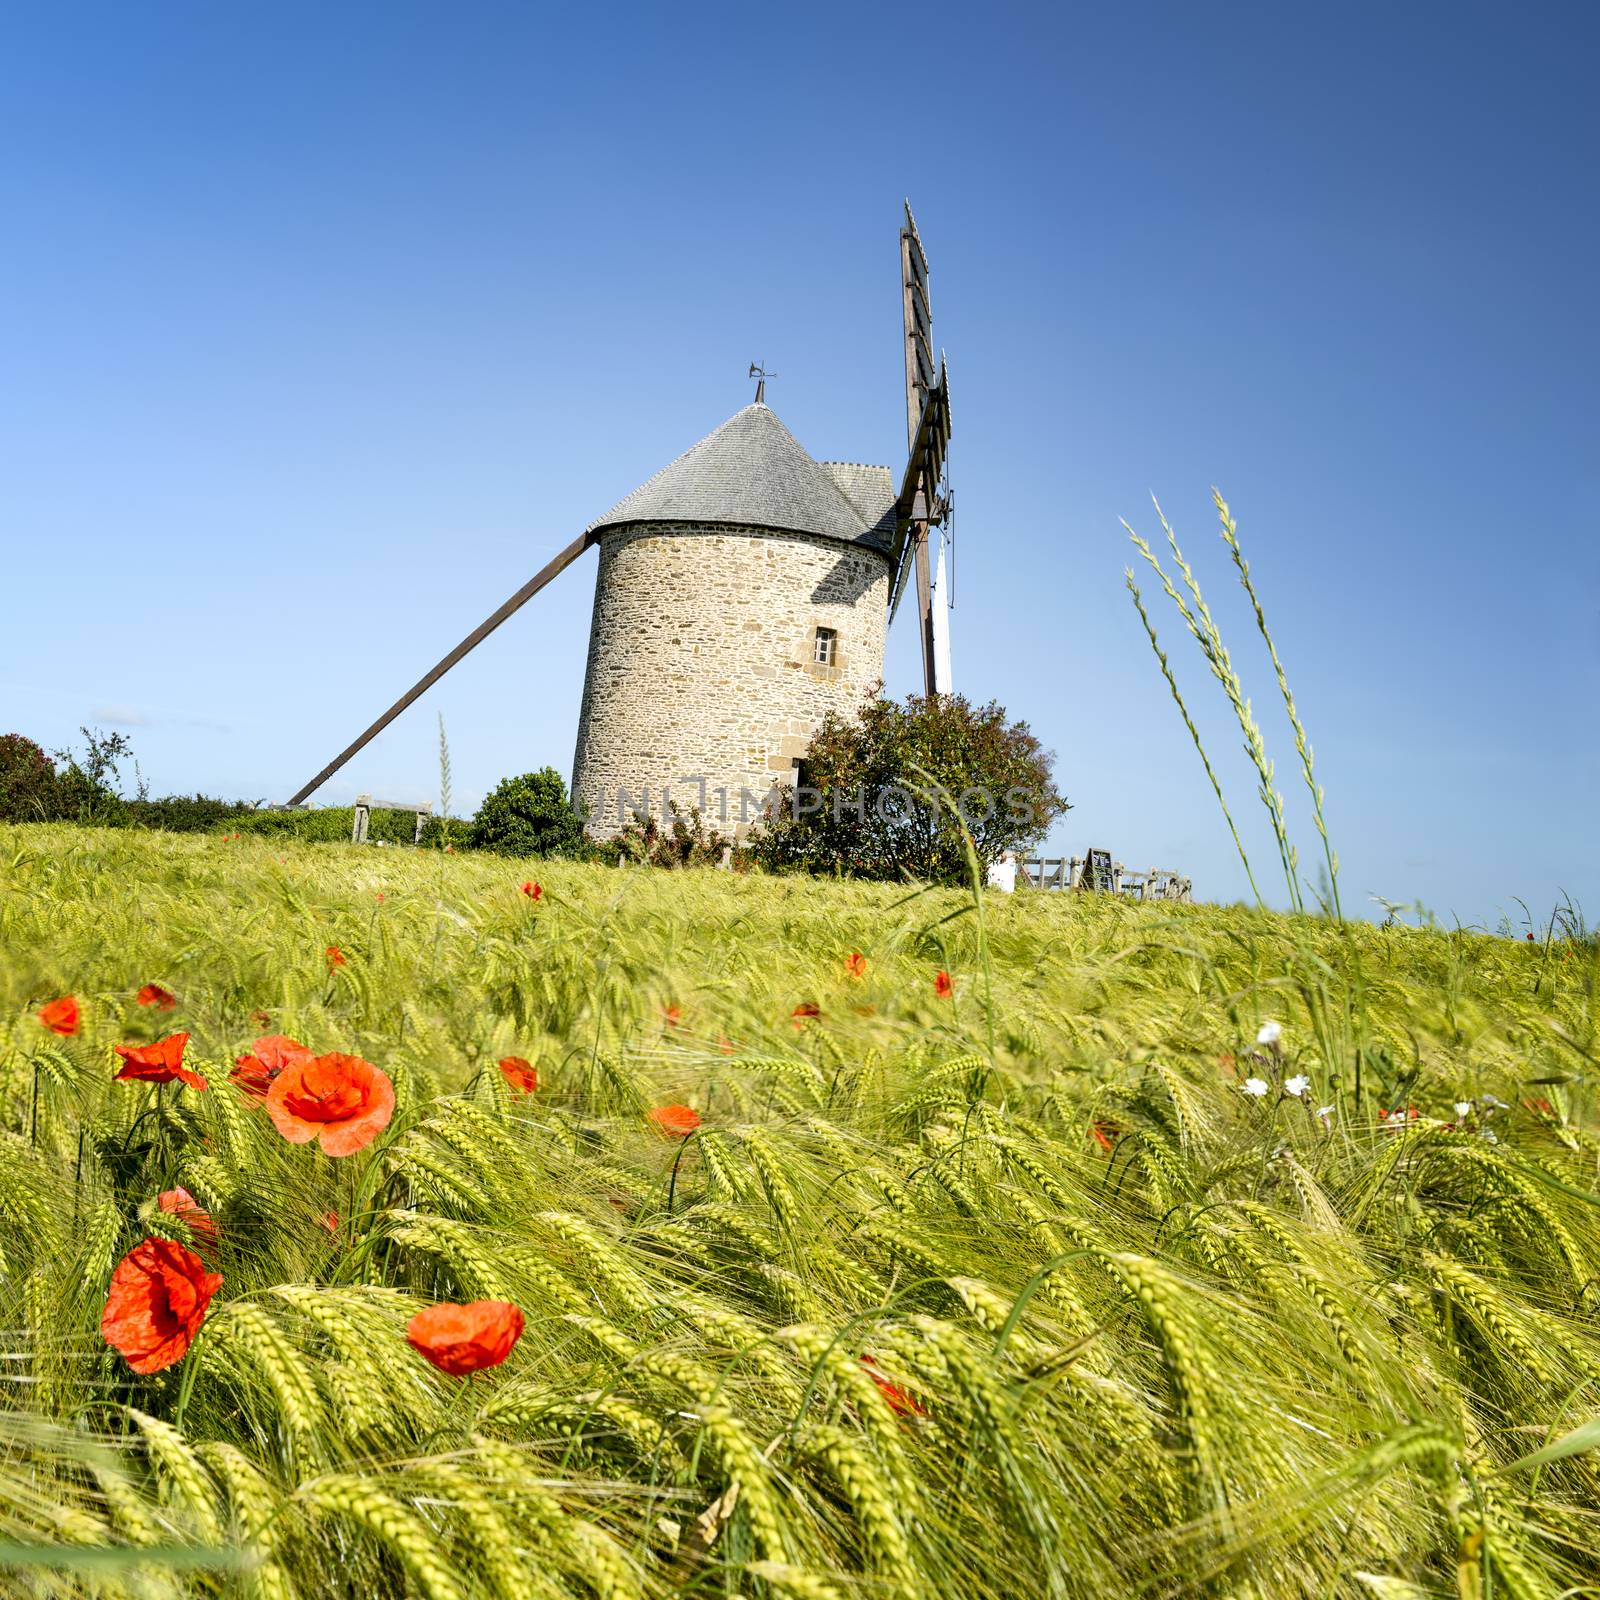 France, the Moidrey windmill in Pontorson in Normandie